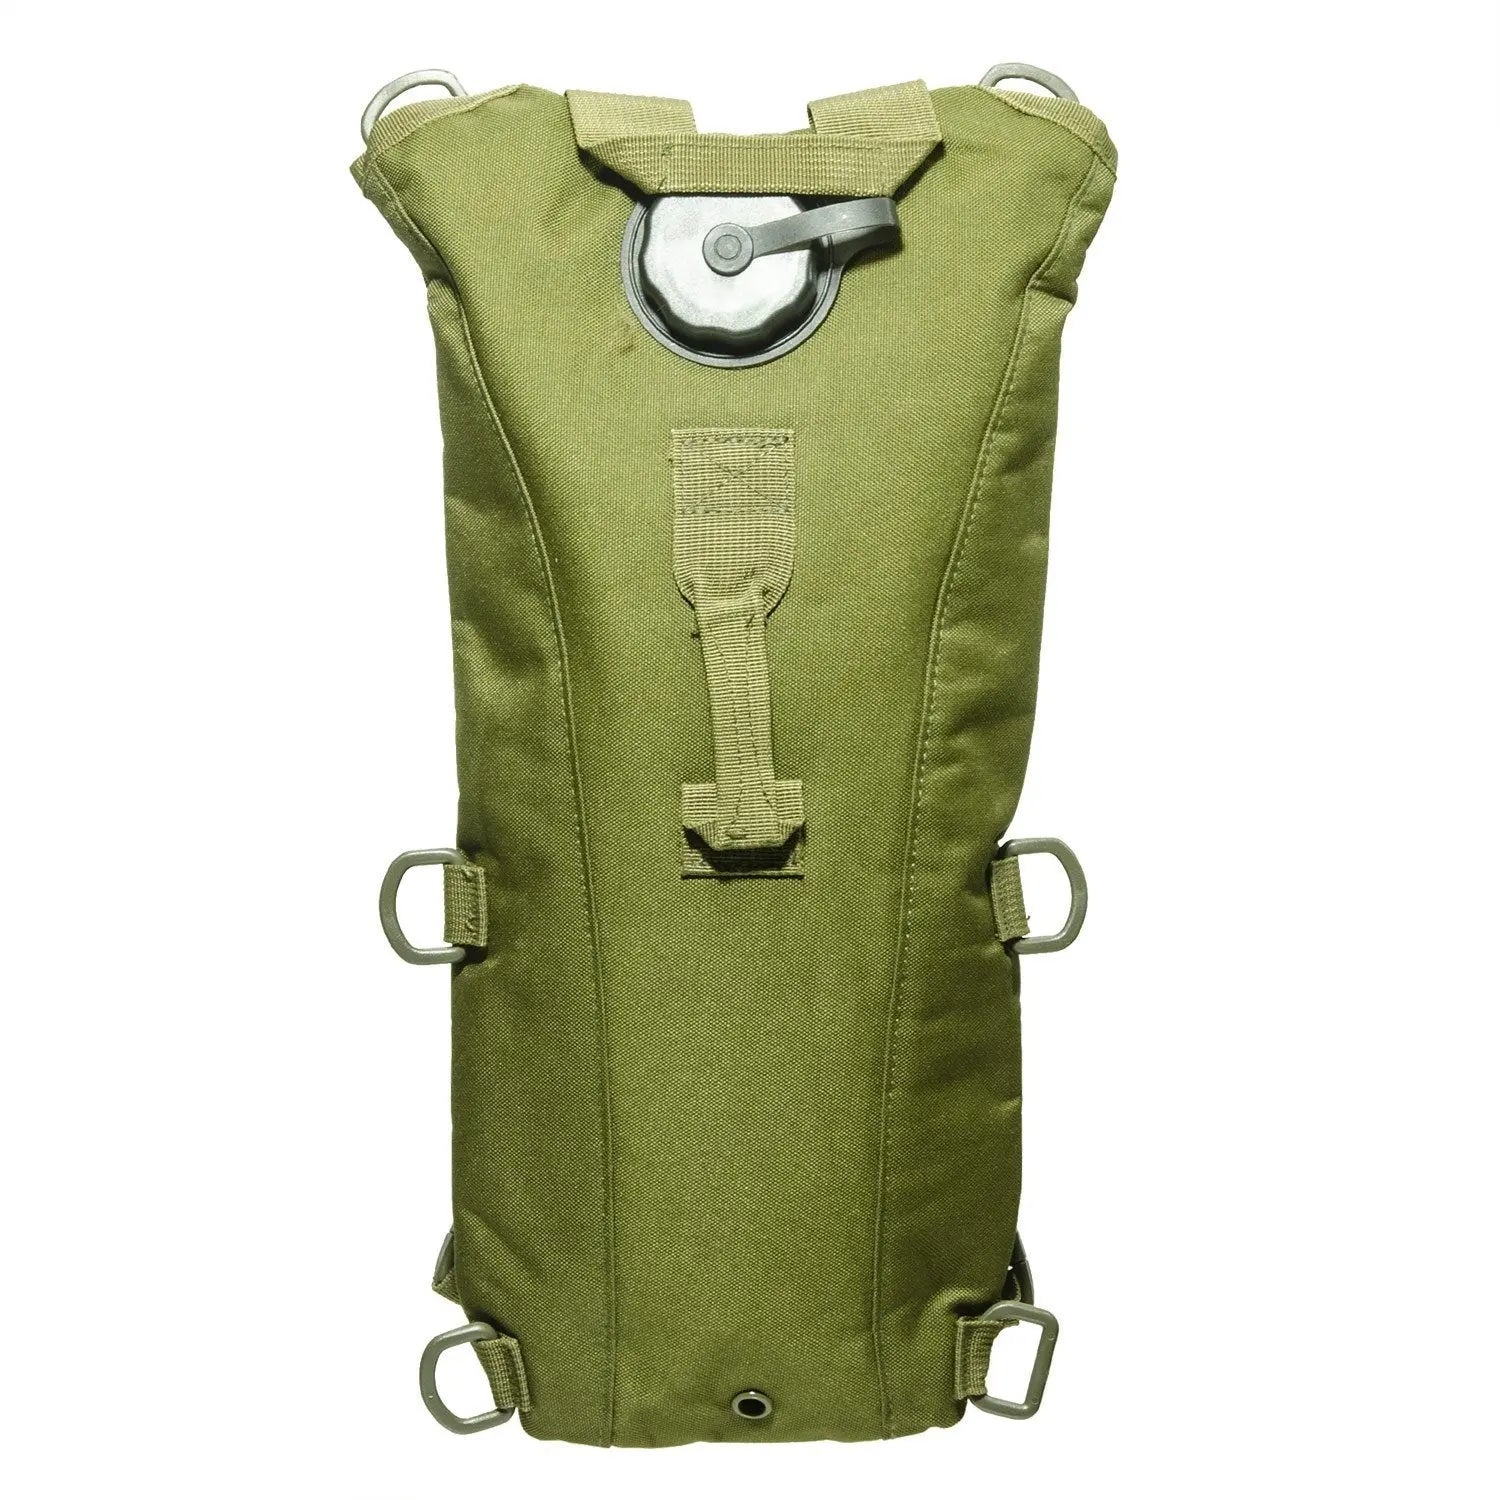 GeyserPac | 3 Liters/100 fl. oz. Hydration Backpack Goat Trail Tactical 